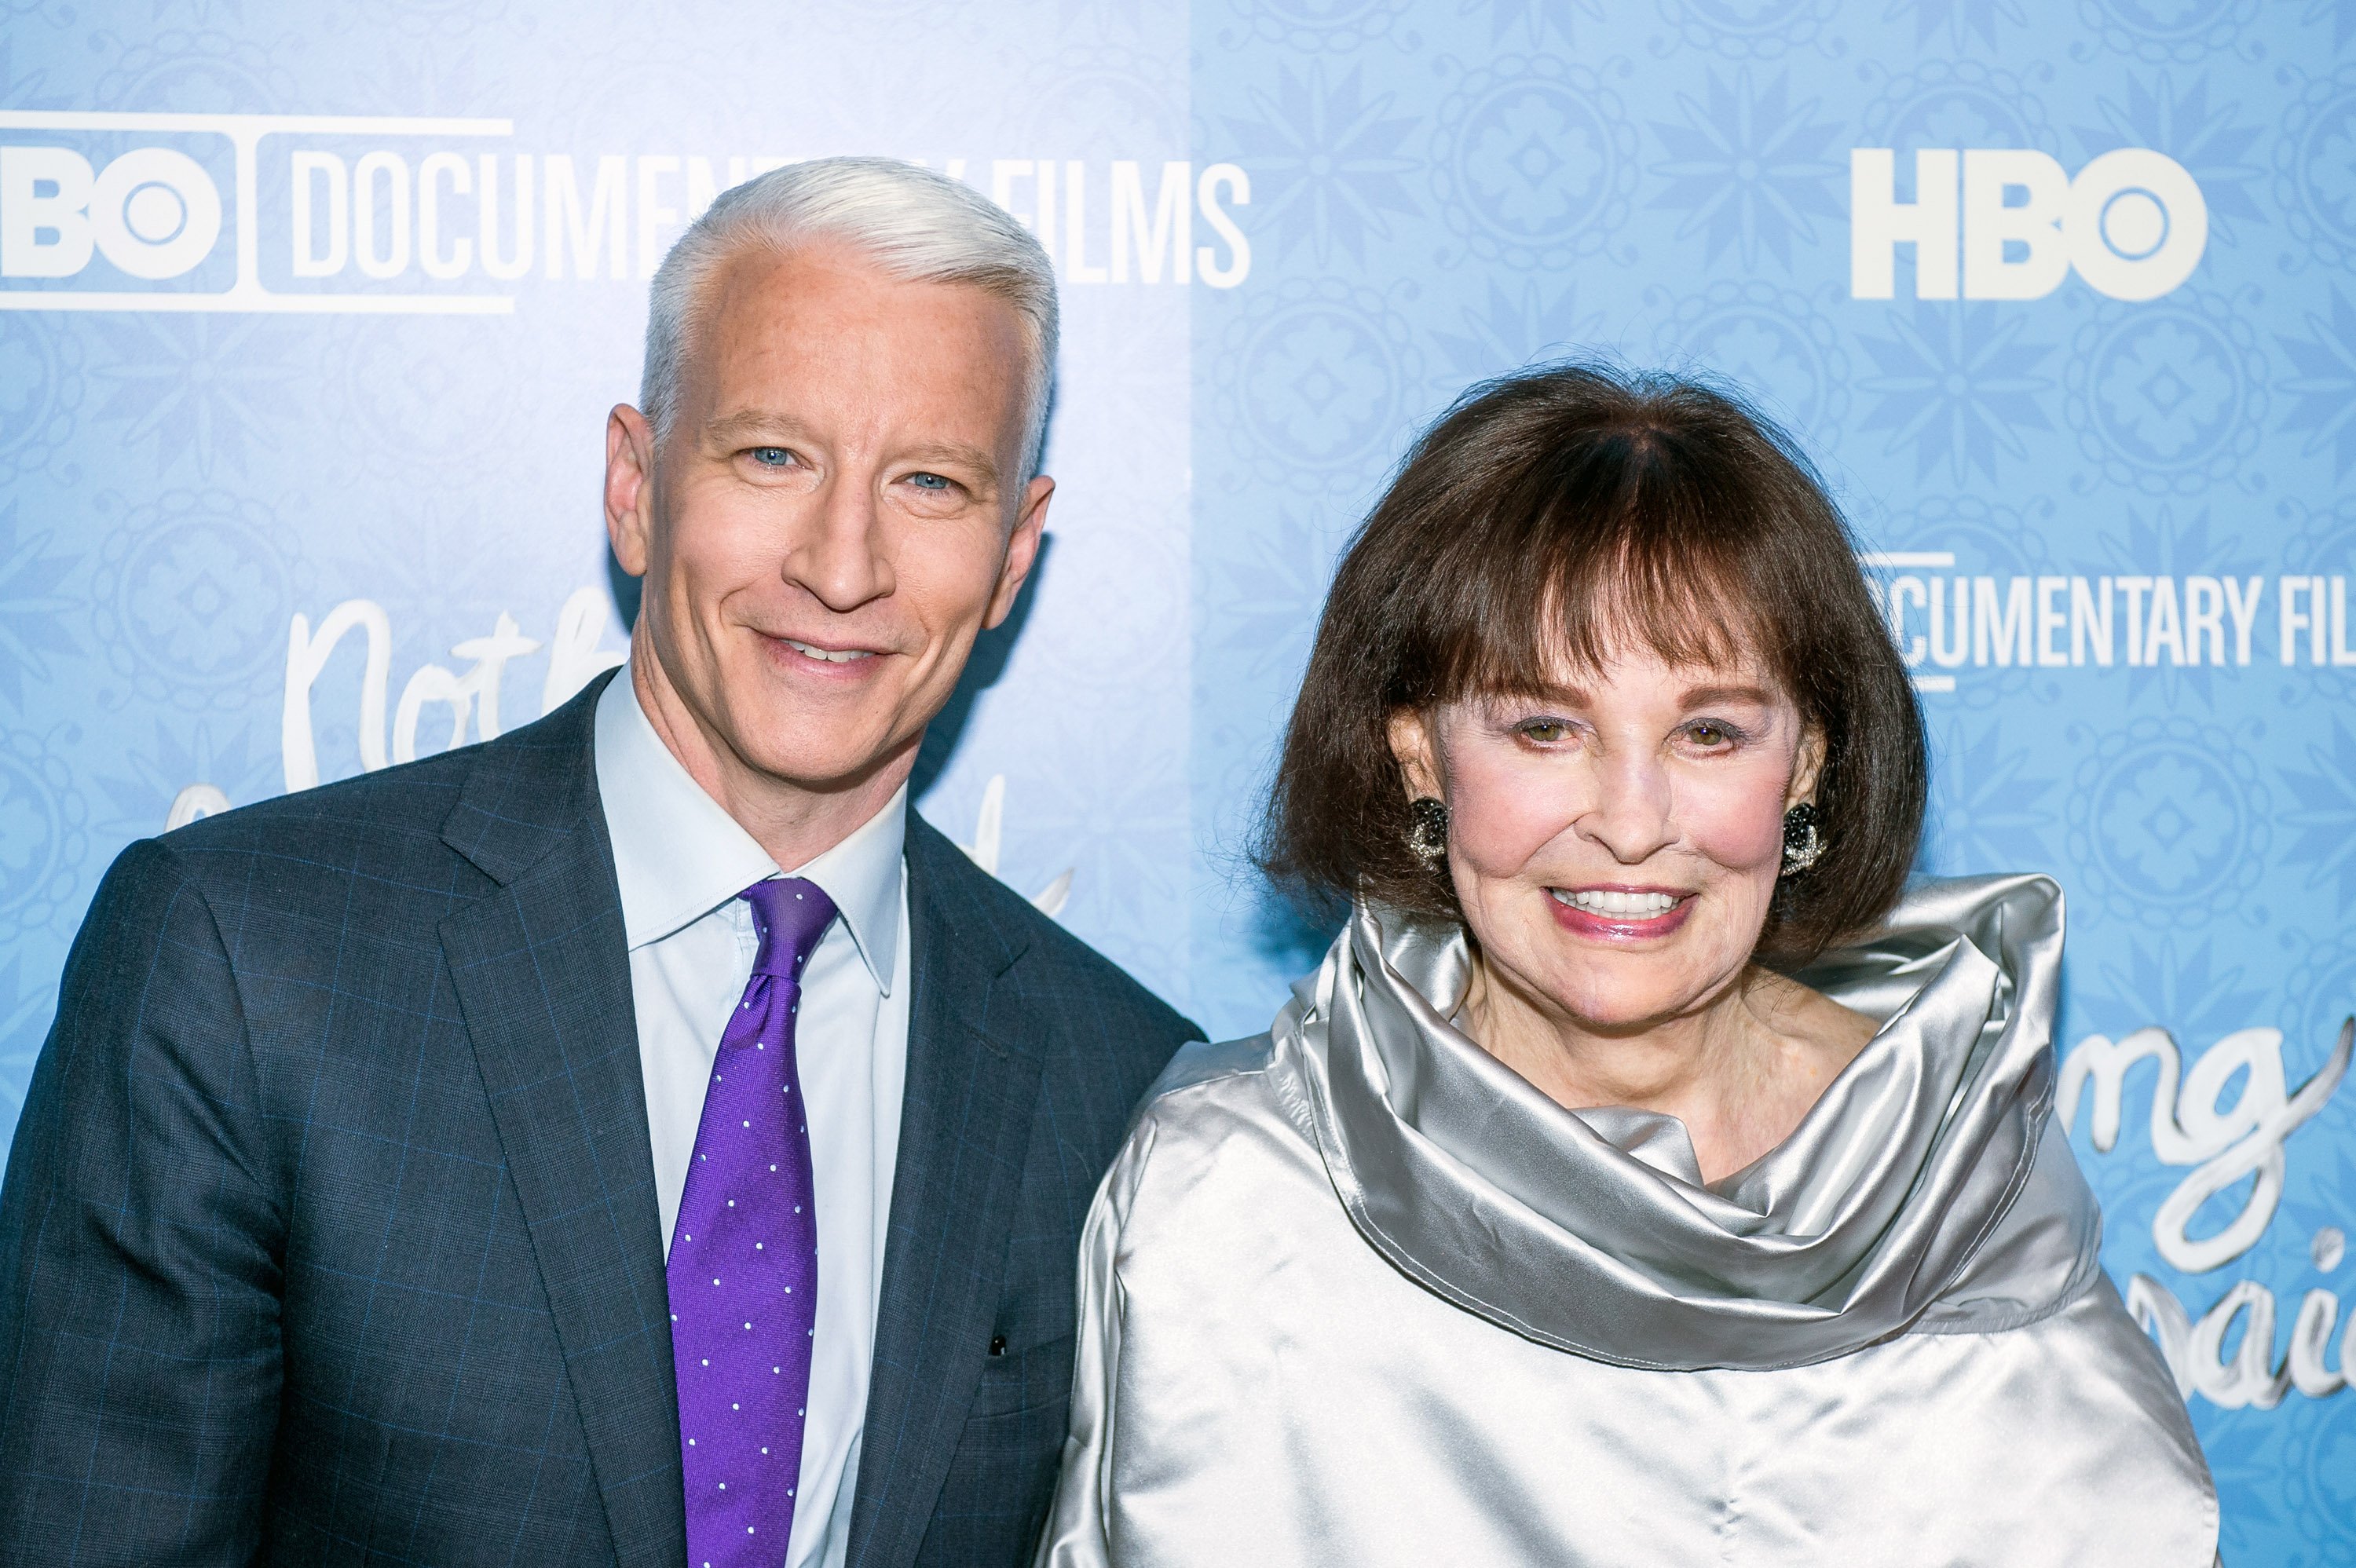 Anderson Cooper and Gloria Vanderbilt attend "Nothing Left Unsaid" Premiere at Time Warner Center on April 4, 2016 in New York City.  | Source: Getty Images